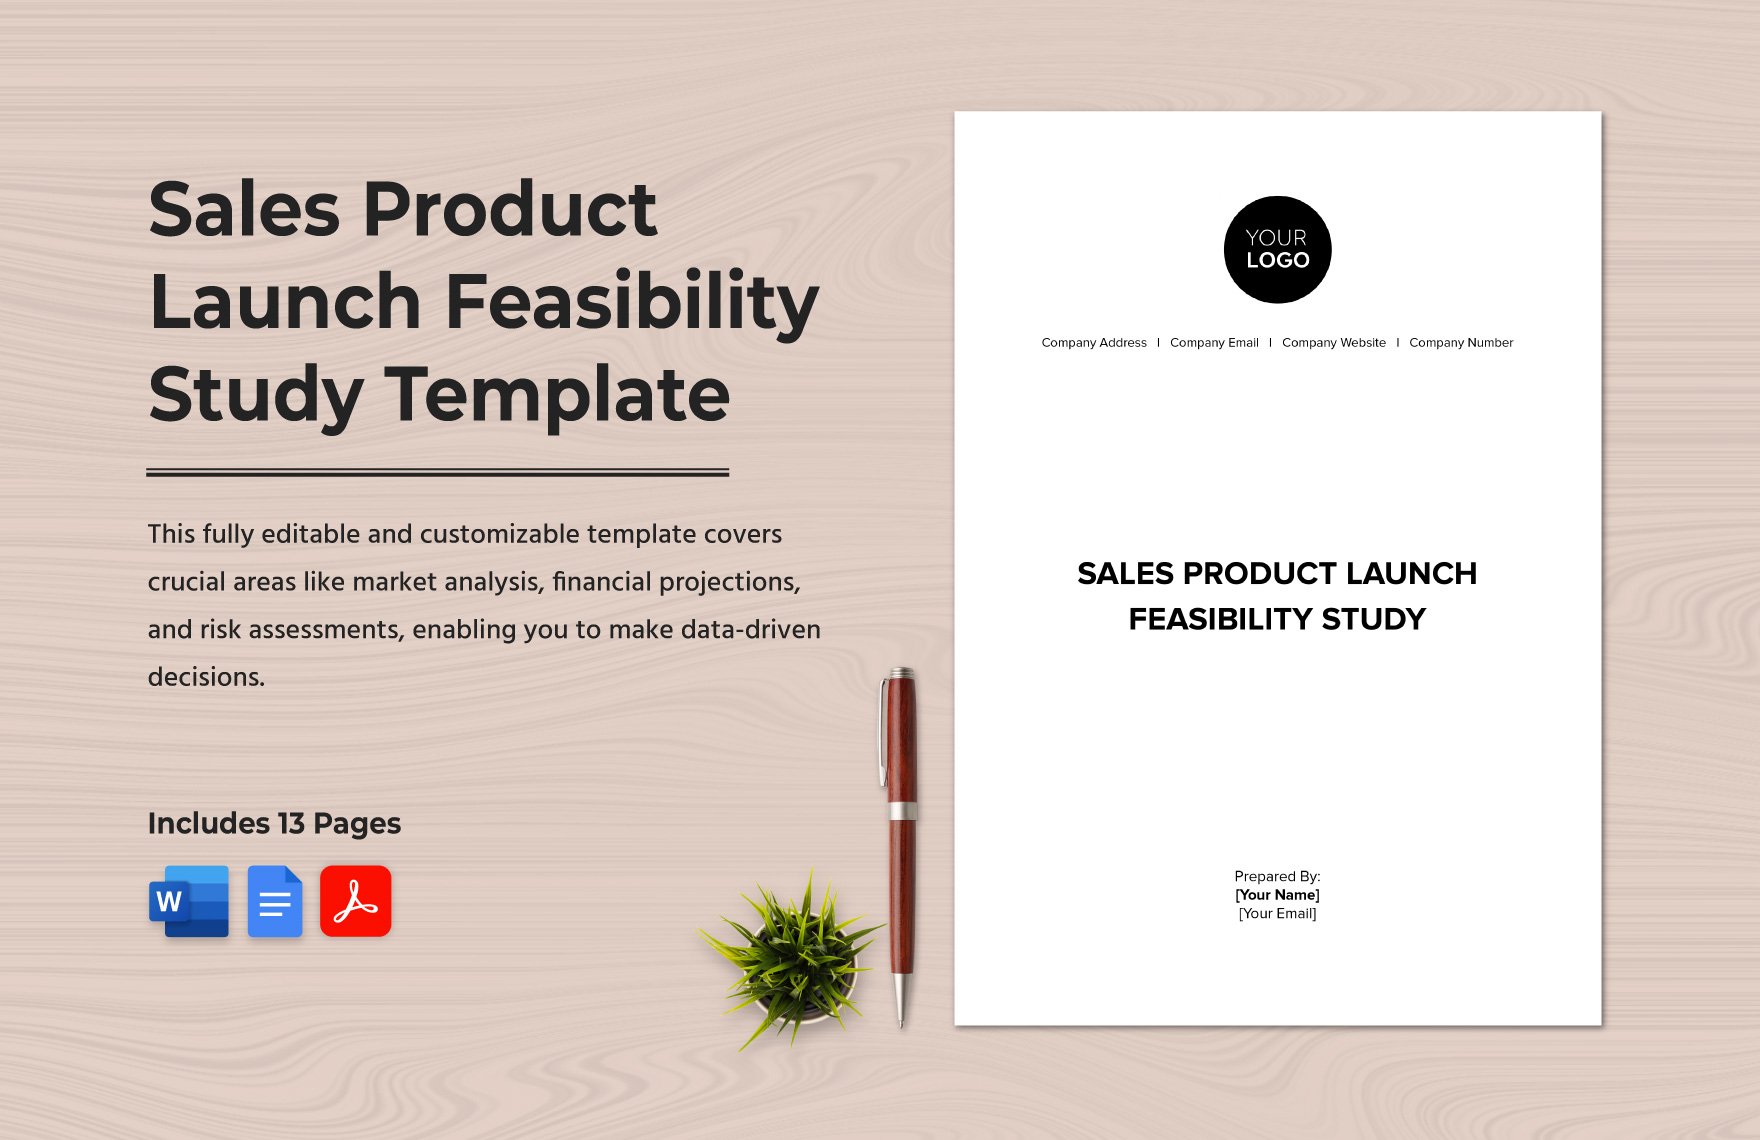 Sales Product Launch Feasibility Study Template